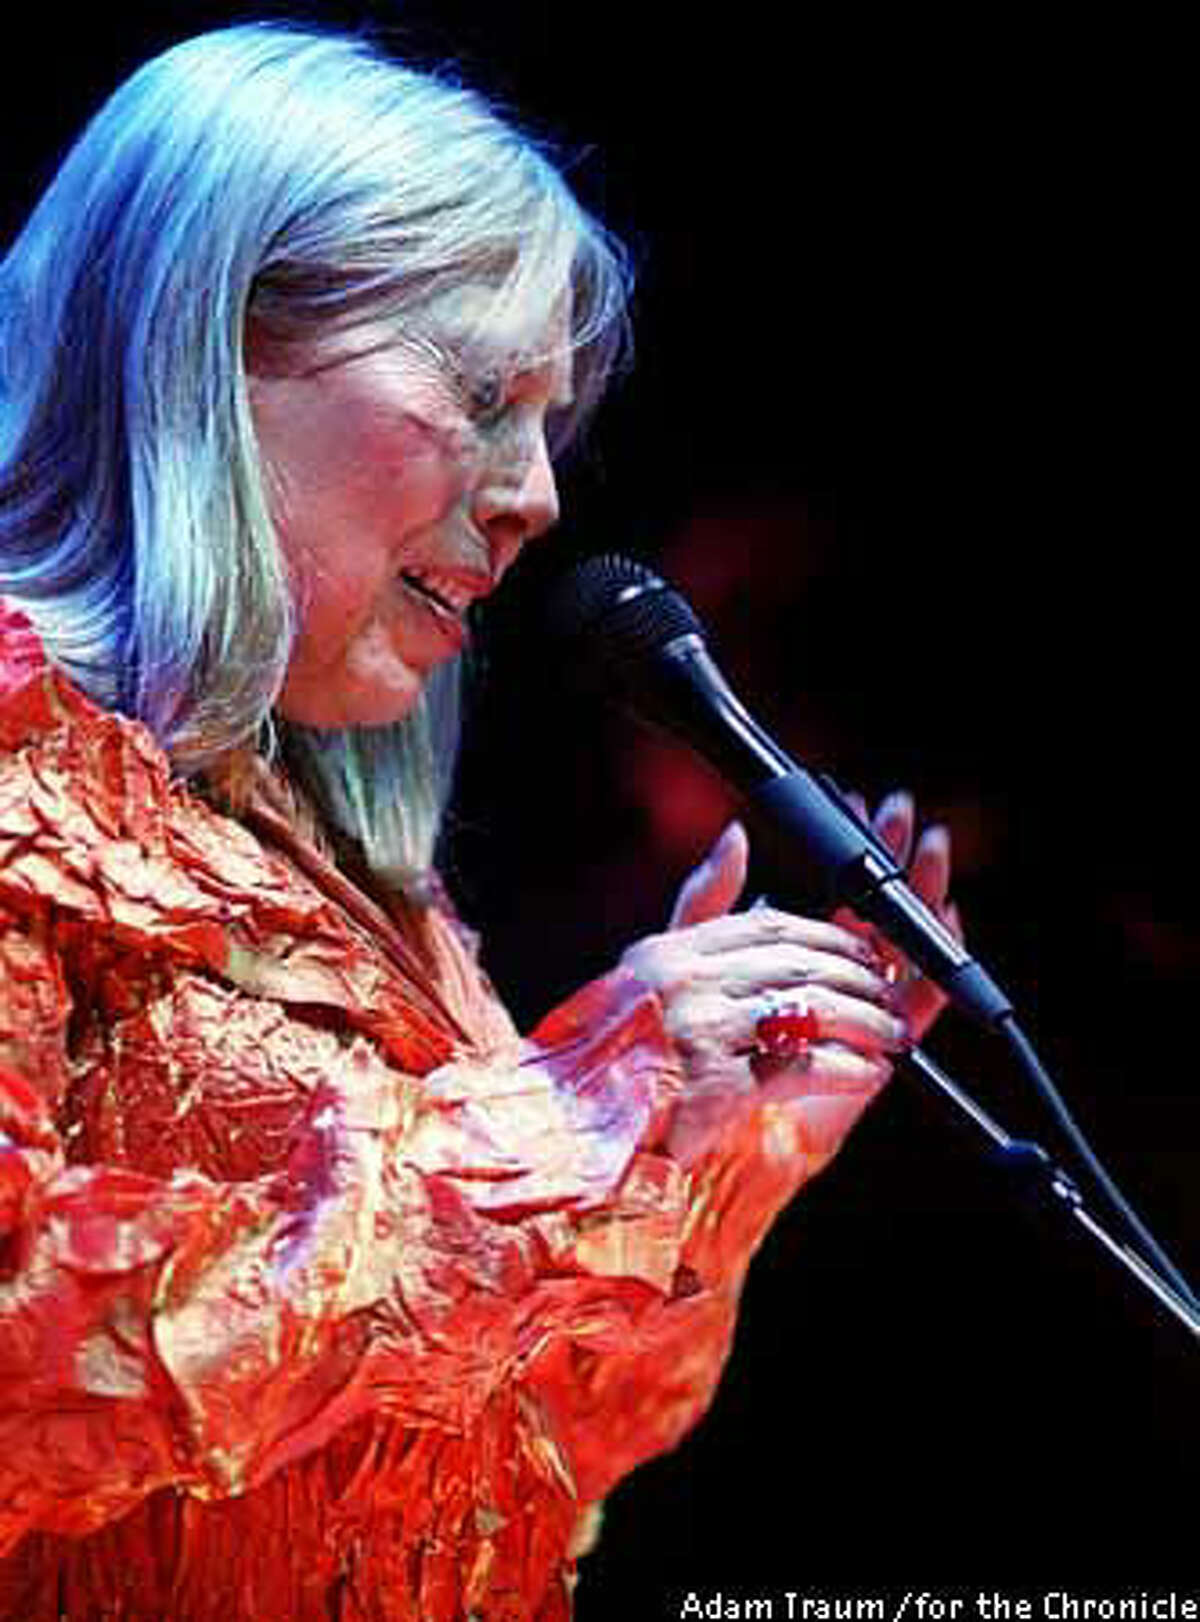 Joni Mitchell, backed by a full symphony orchestra, sang from her album of pop standards Saturday night at the Chronicle Pavilion in Concord. Photo by Adam Traum, for the Chronicle.